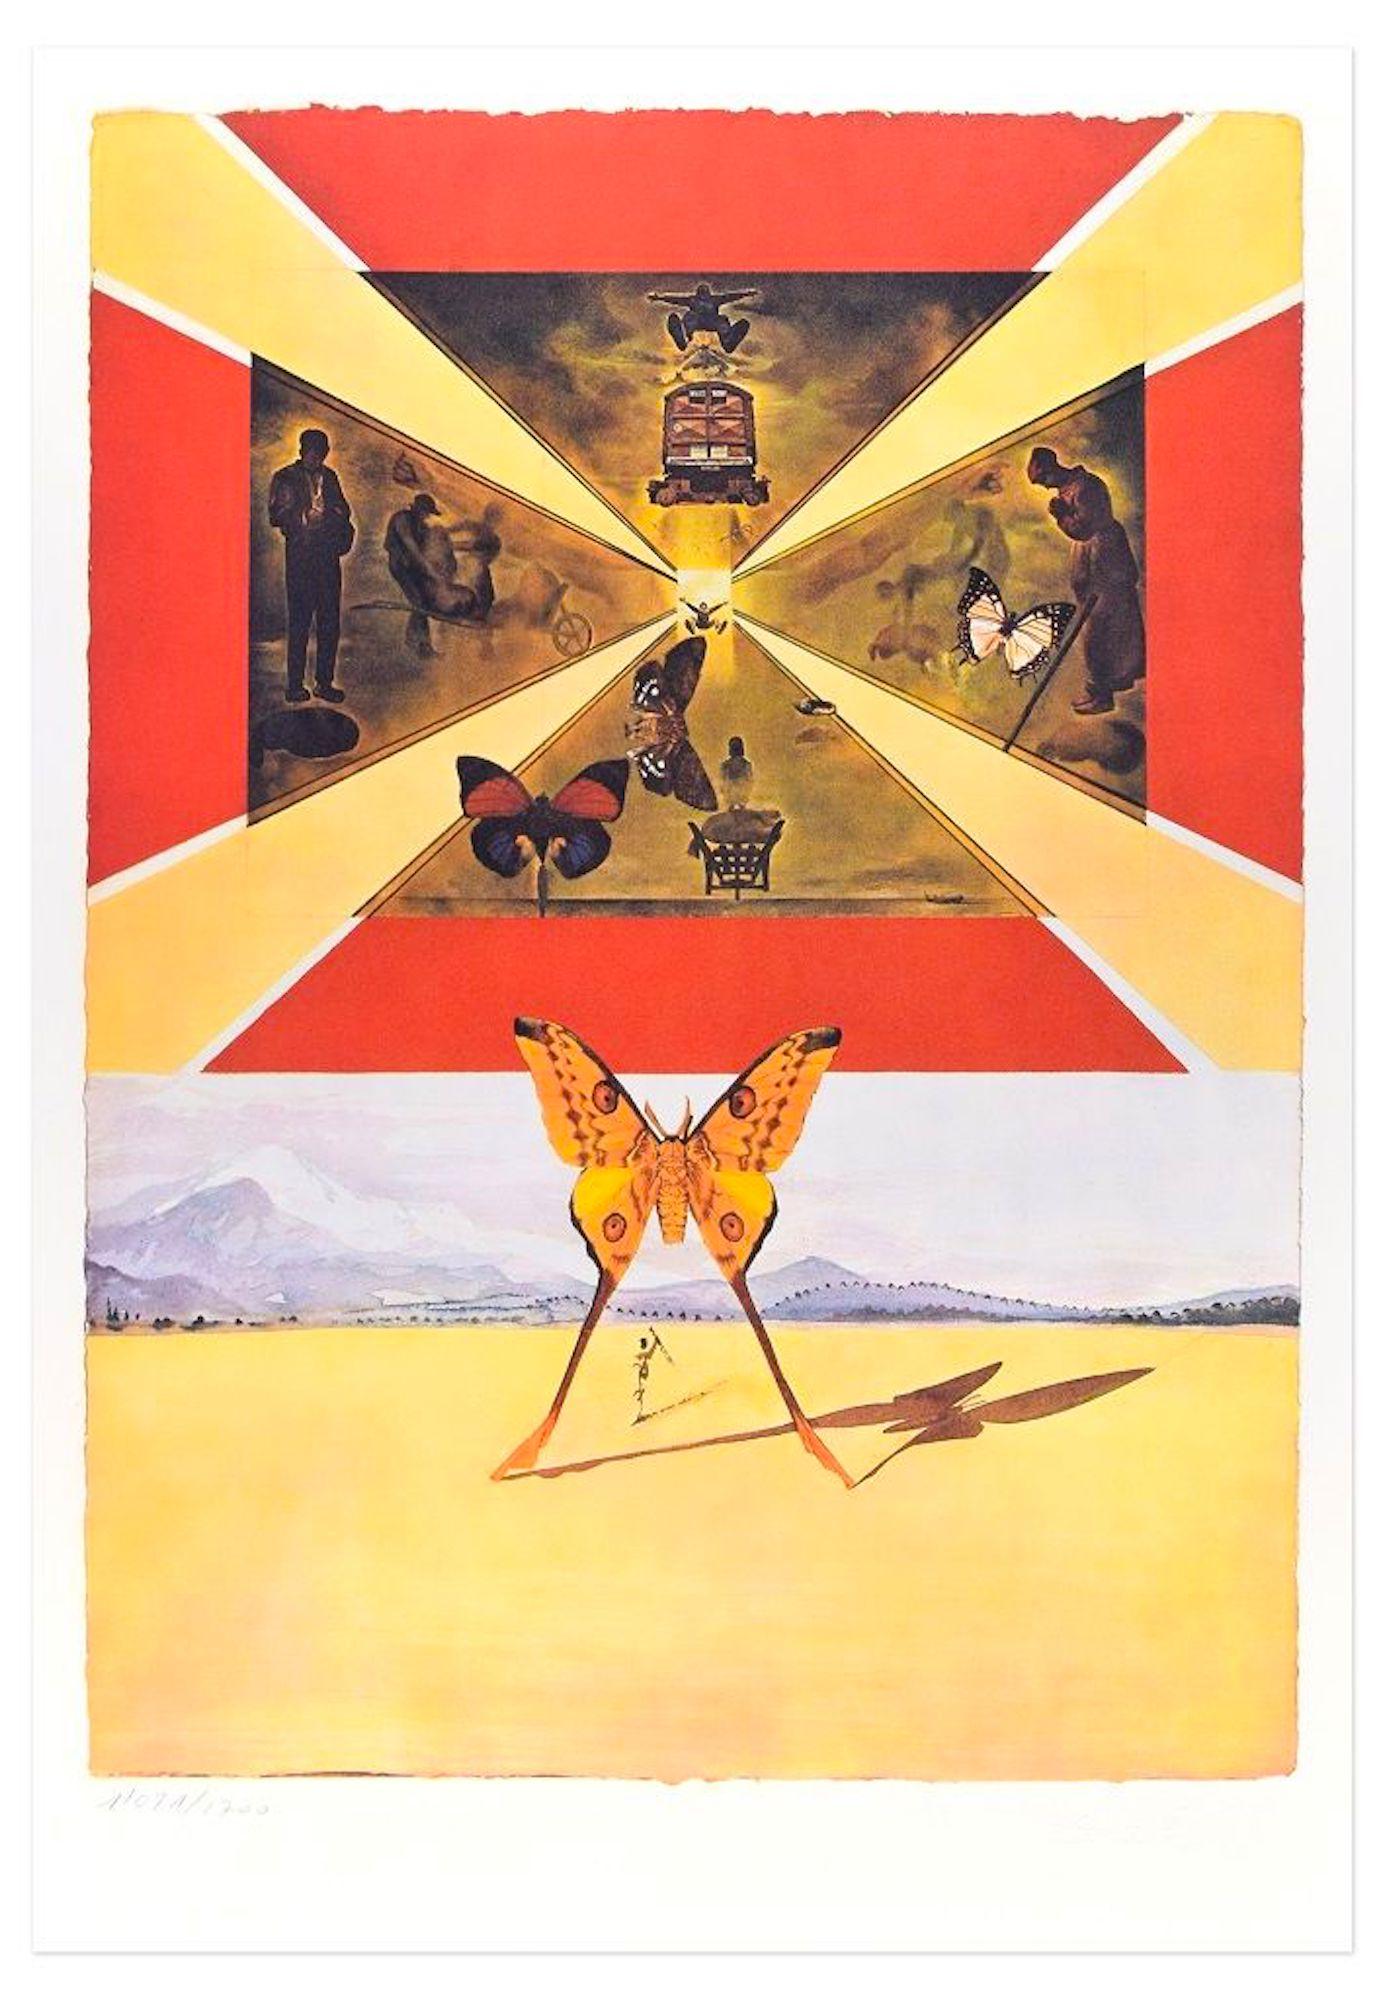 Salvador Dalí Print - Plate V - From "Suite Papillon" - Original Lithograph and Heliogravure - 1969